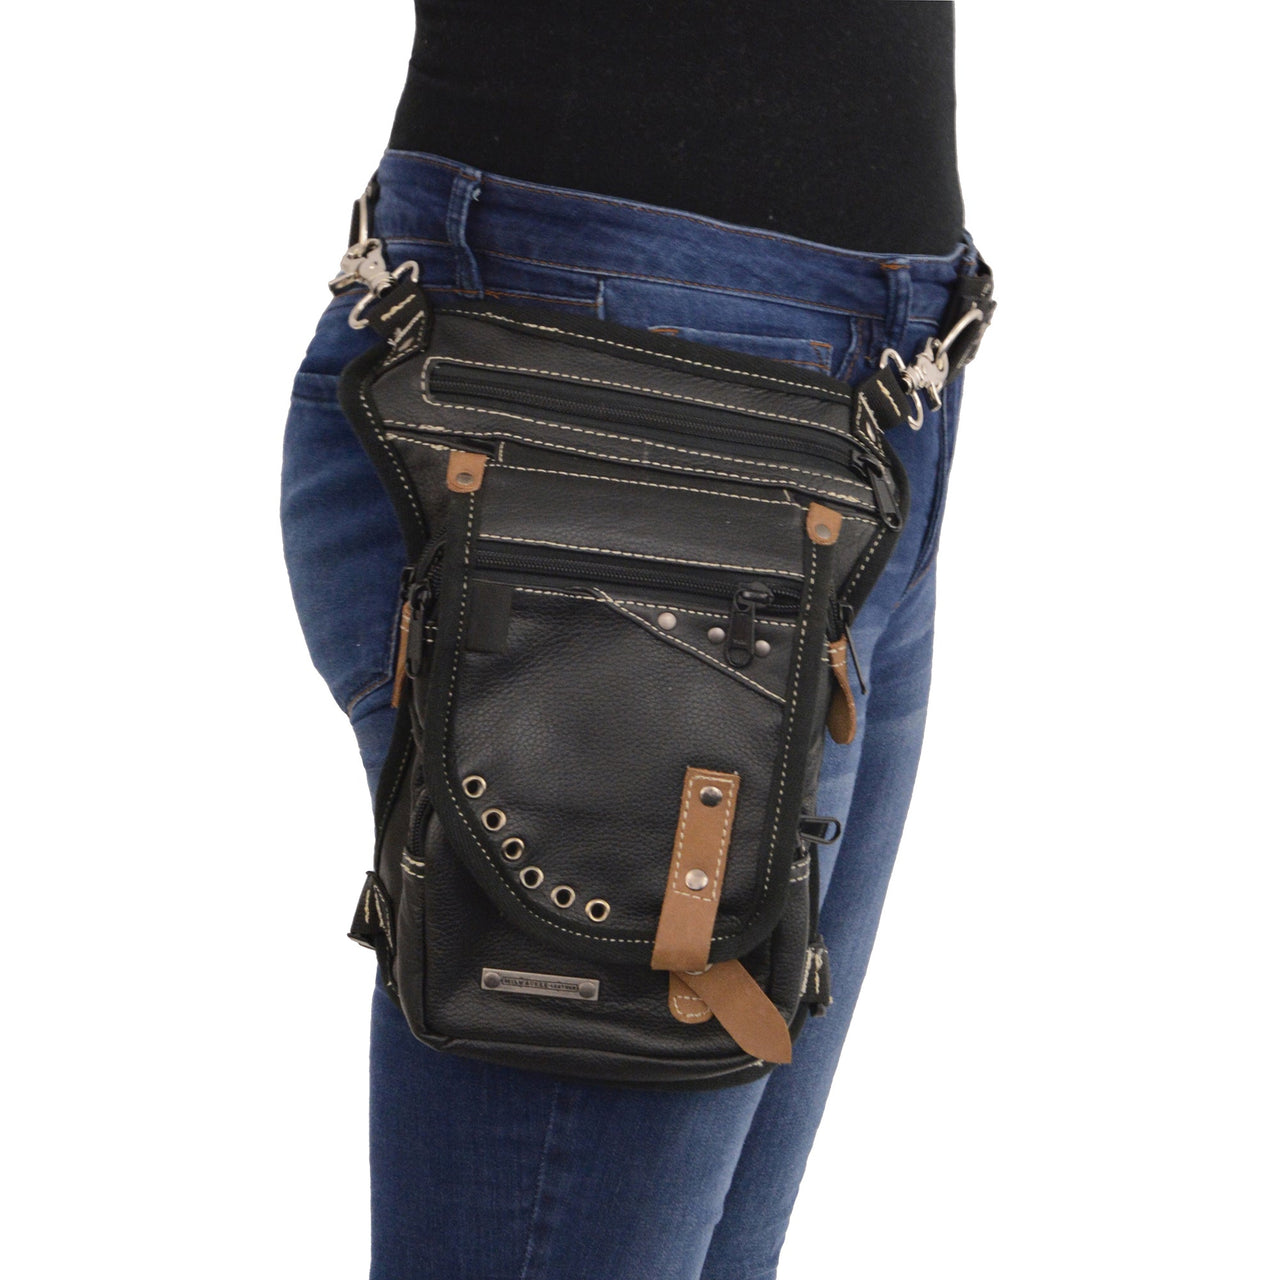 Conceal & Carry Black Leather Thigh Bag w/ Waist Belt - HighwayLeather